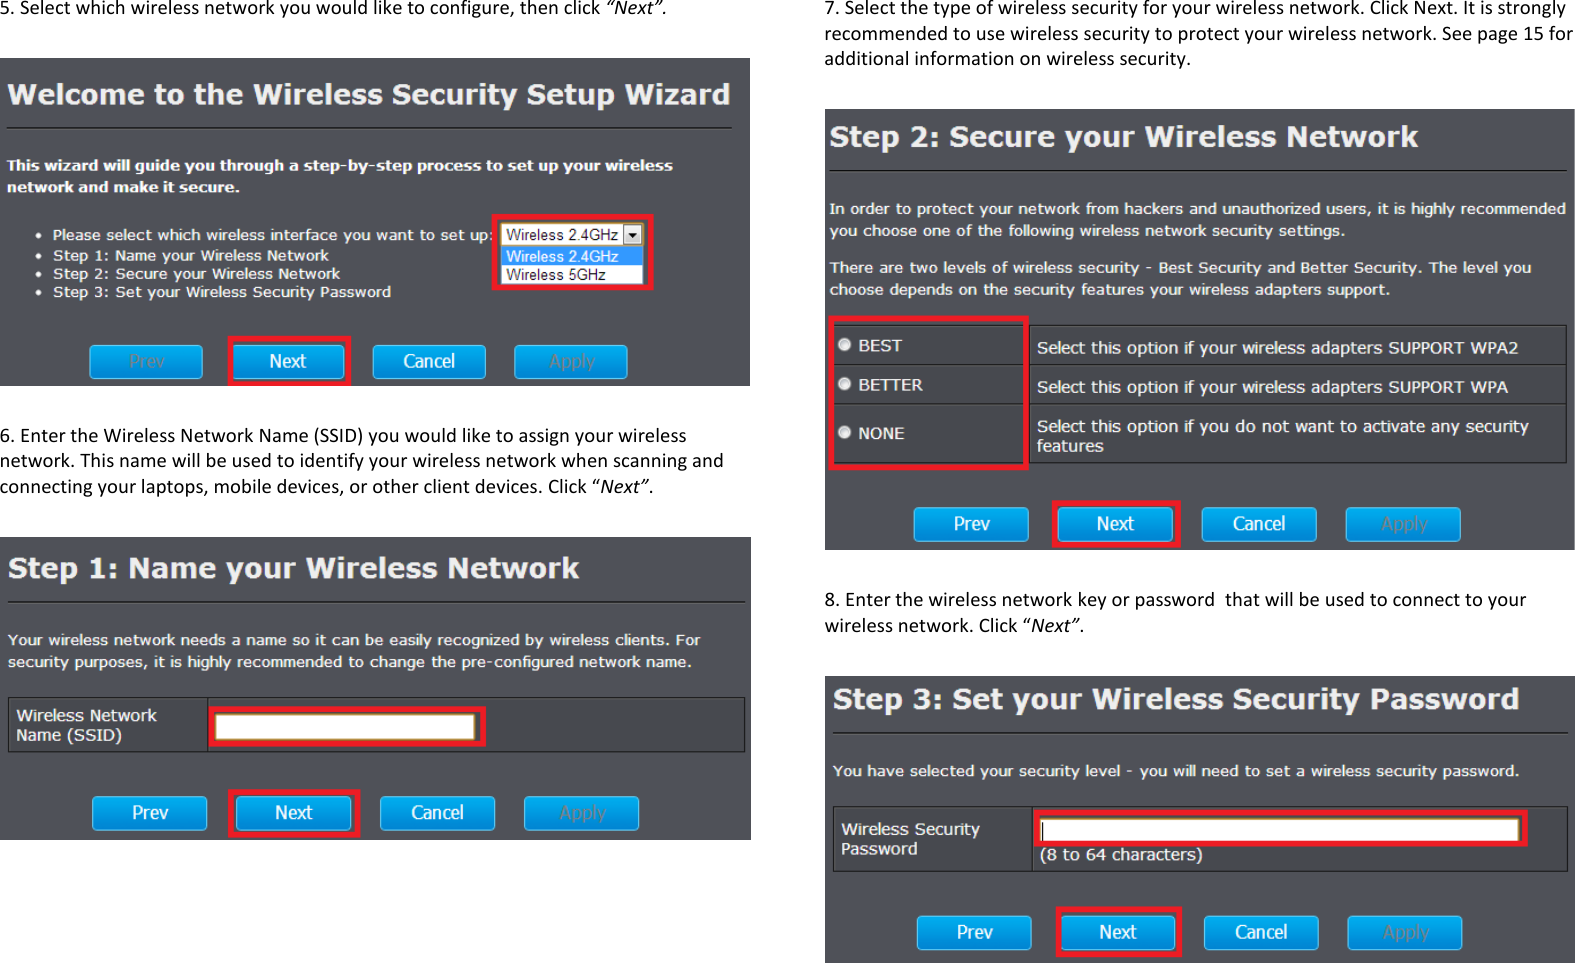 5. Select which wireless network you would like to configure, then click “Next”.     6. Enter the Wireless Network Name (SSID) you would like to assign your wireless network. This name will be used to identify your wireless network when scanning and connecting your laptops, mobile devices, or other client devices. Click “Next”.    7. Select the type of wireless security for your wireless network. Click Next. It is strongly recommended to use wireless security to protect your wireless network. See page 15 for additional information on wireless security.    8. Enter the wireless network key or password  that will be used to connect to your wireless network. Click “Next”.   